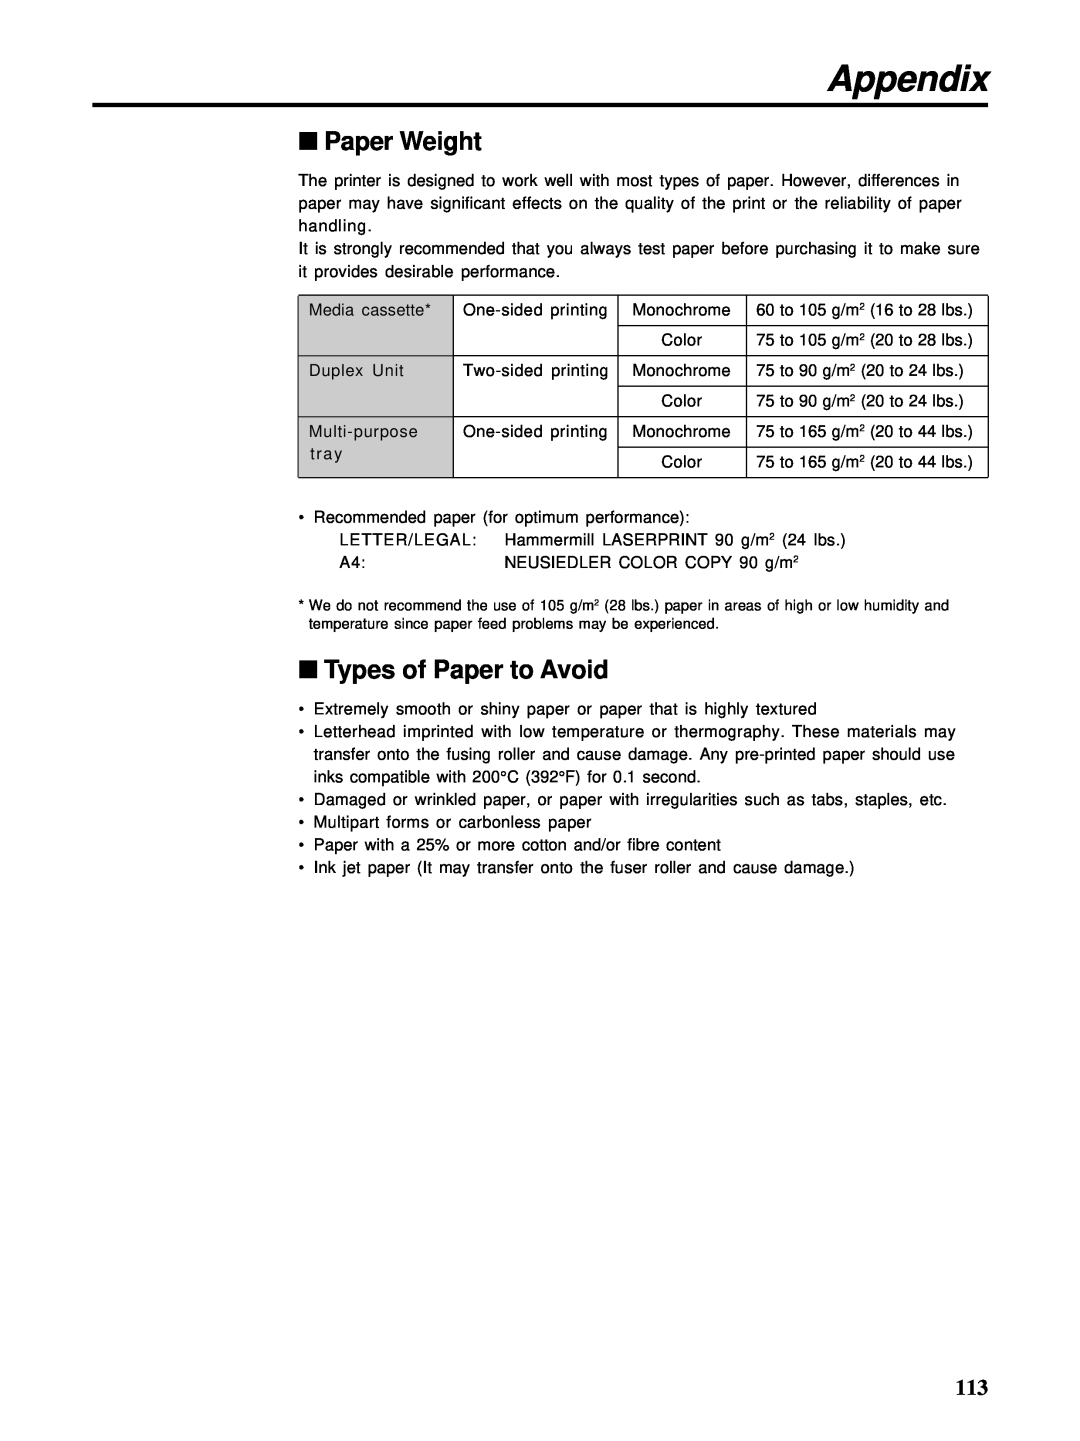 HP Ci 1100 manual Paper Weight, Types of Paper to Avoid, Appendix 